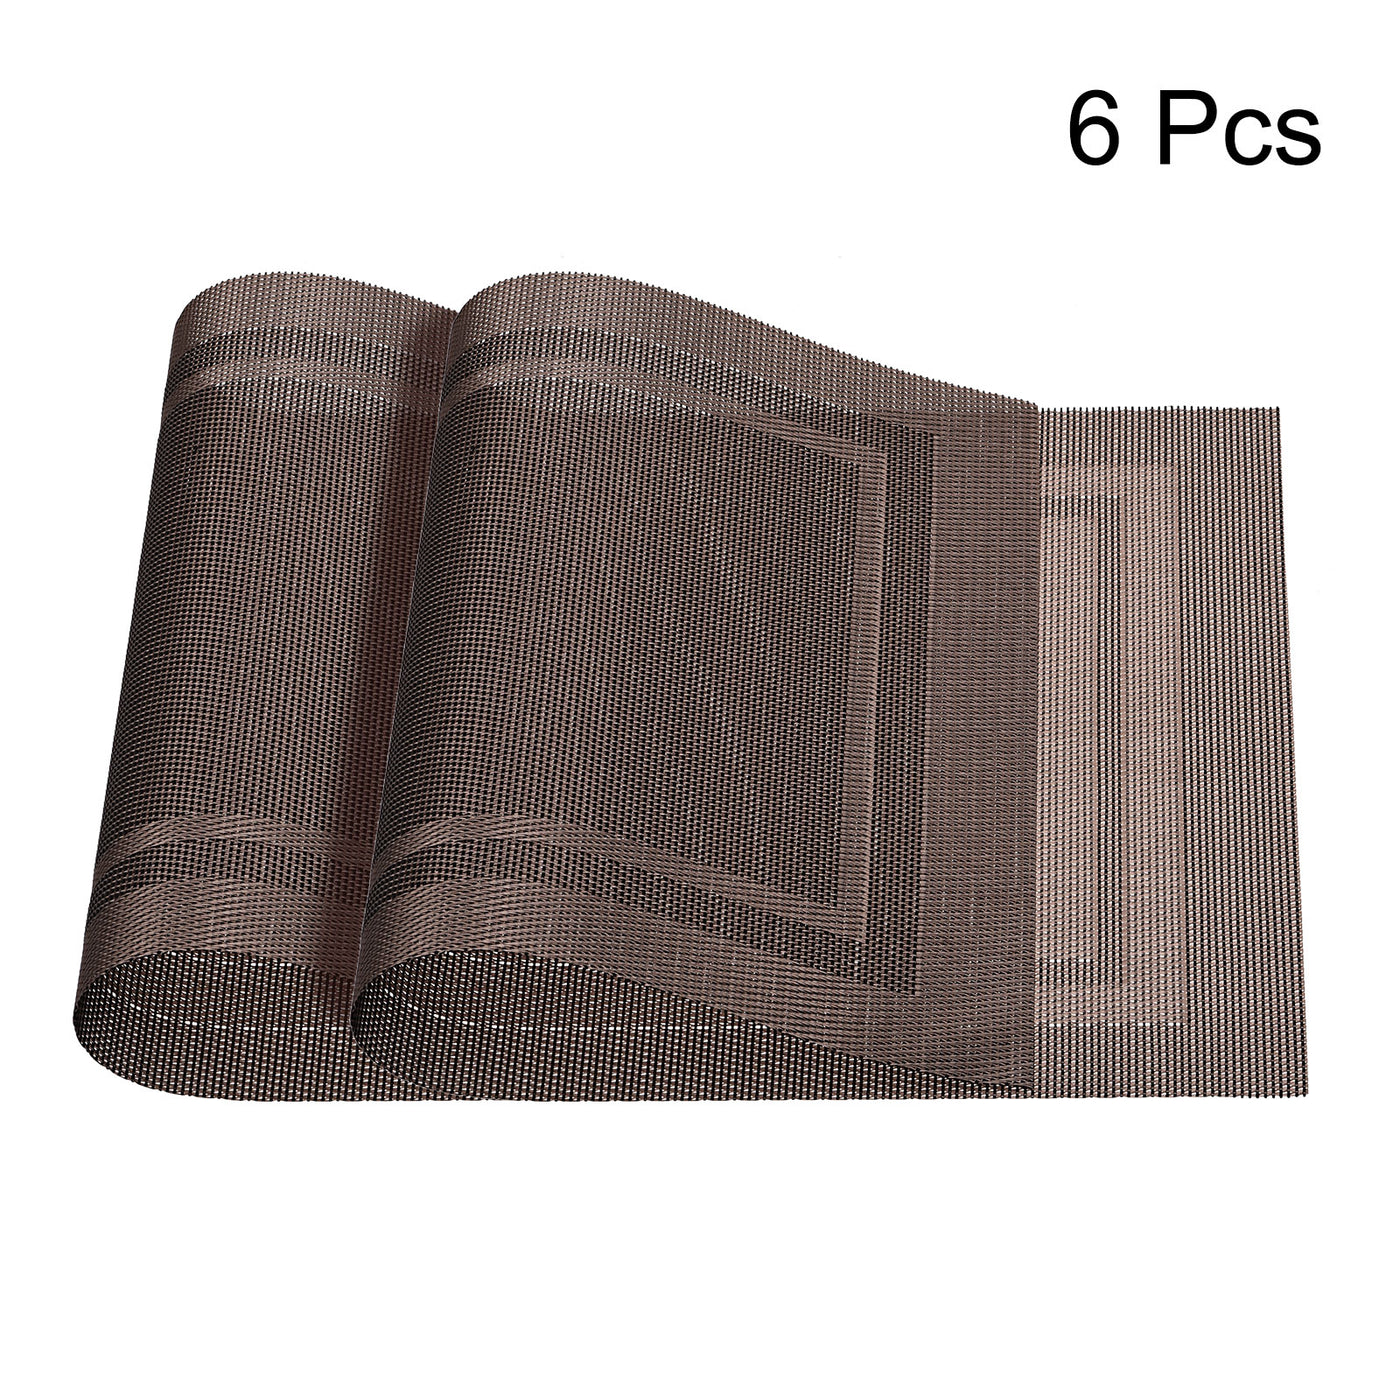 uxcell Uxcell Place Mats, 450x300mm Table Mats Set of 6 PVC Washable Woven Placemat Coffee